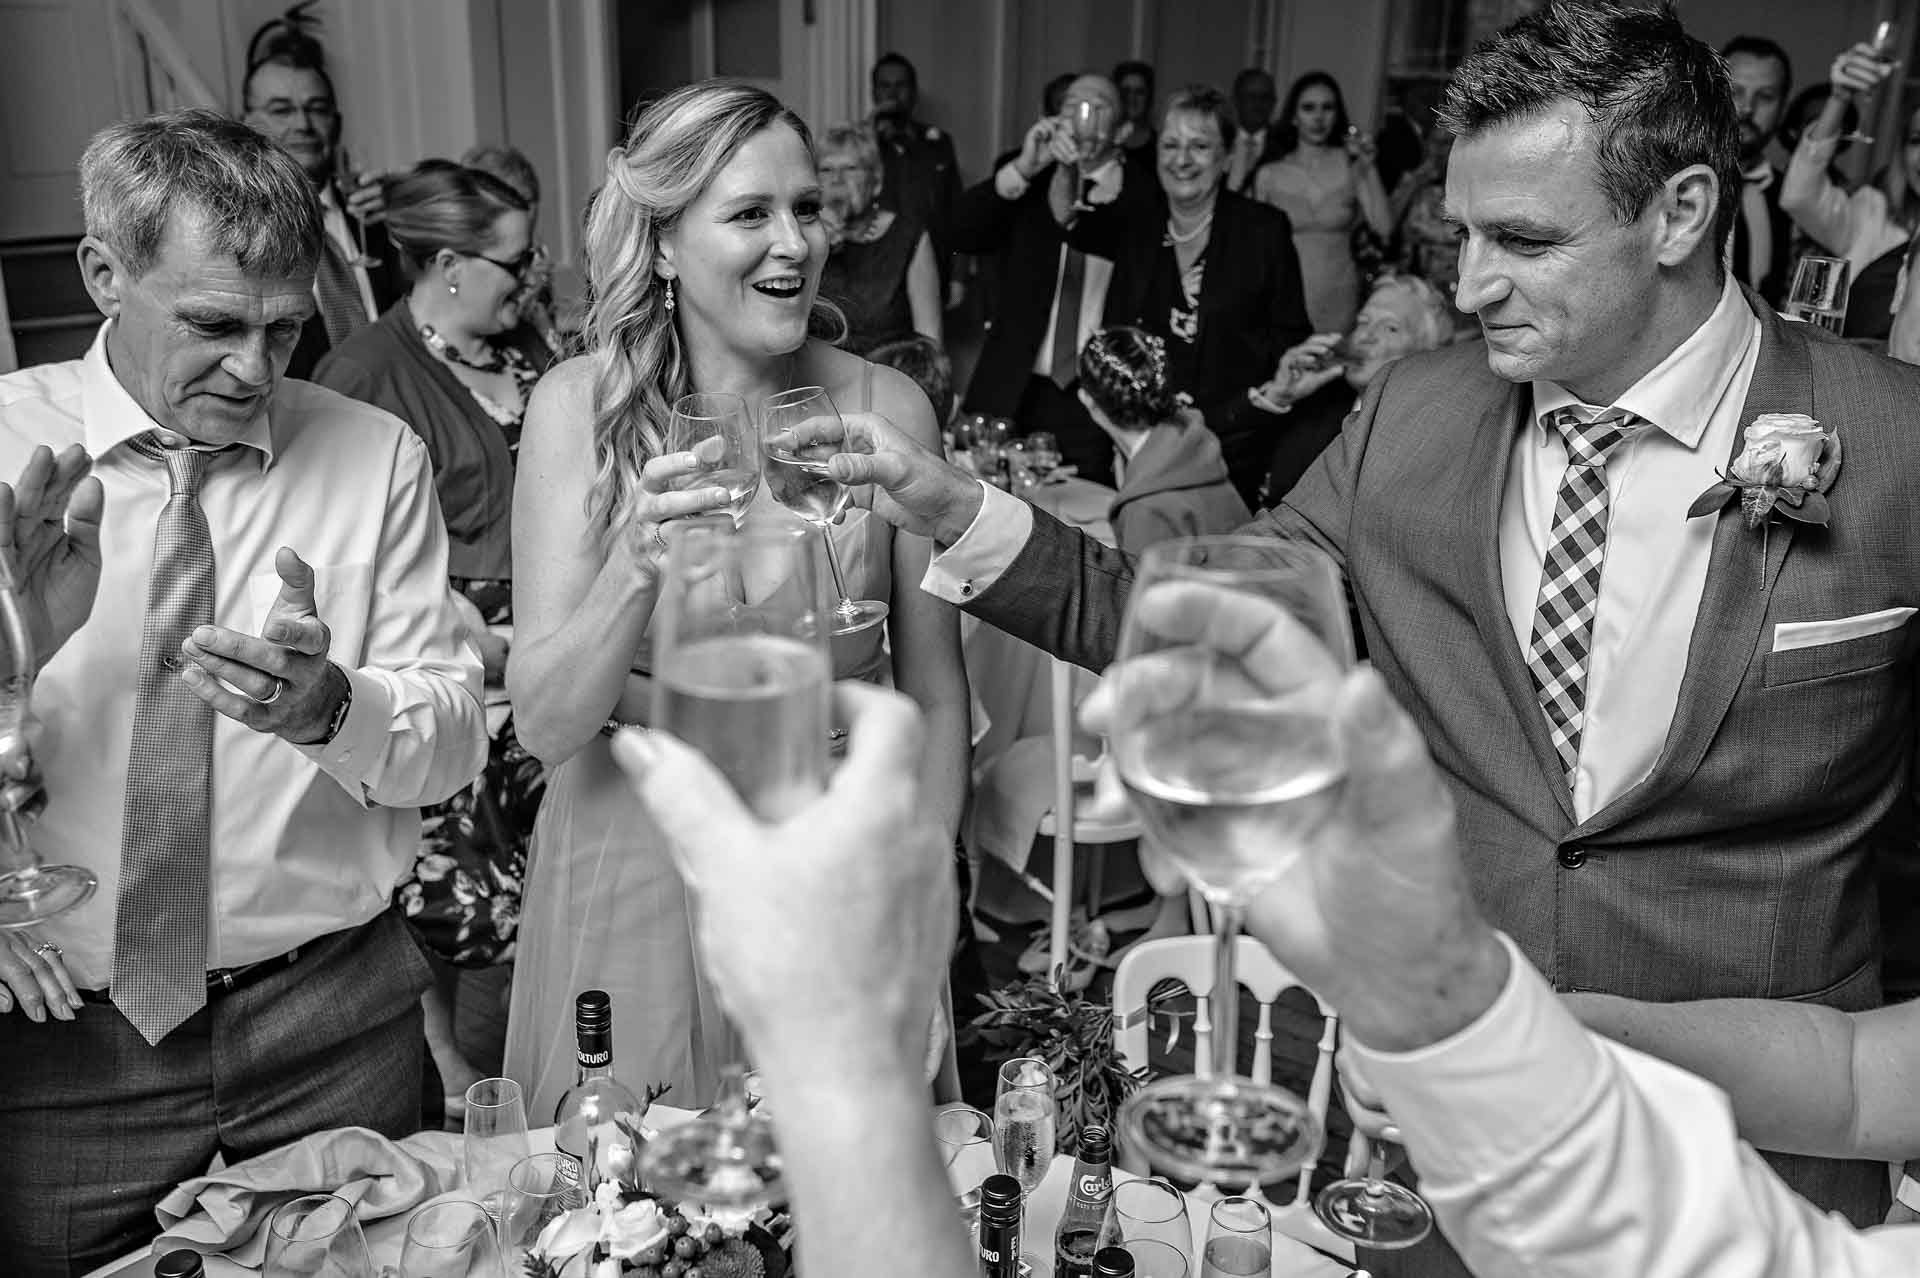 Guests clapping and clinking glasses together during toasts